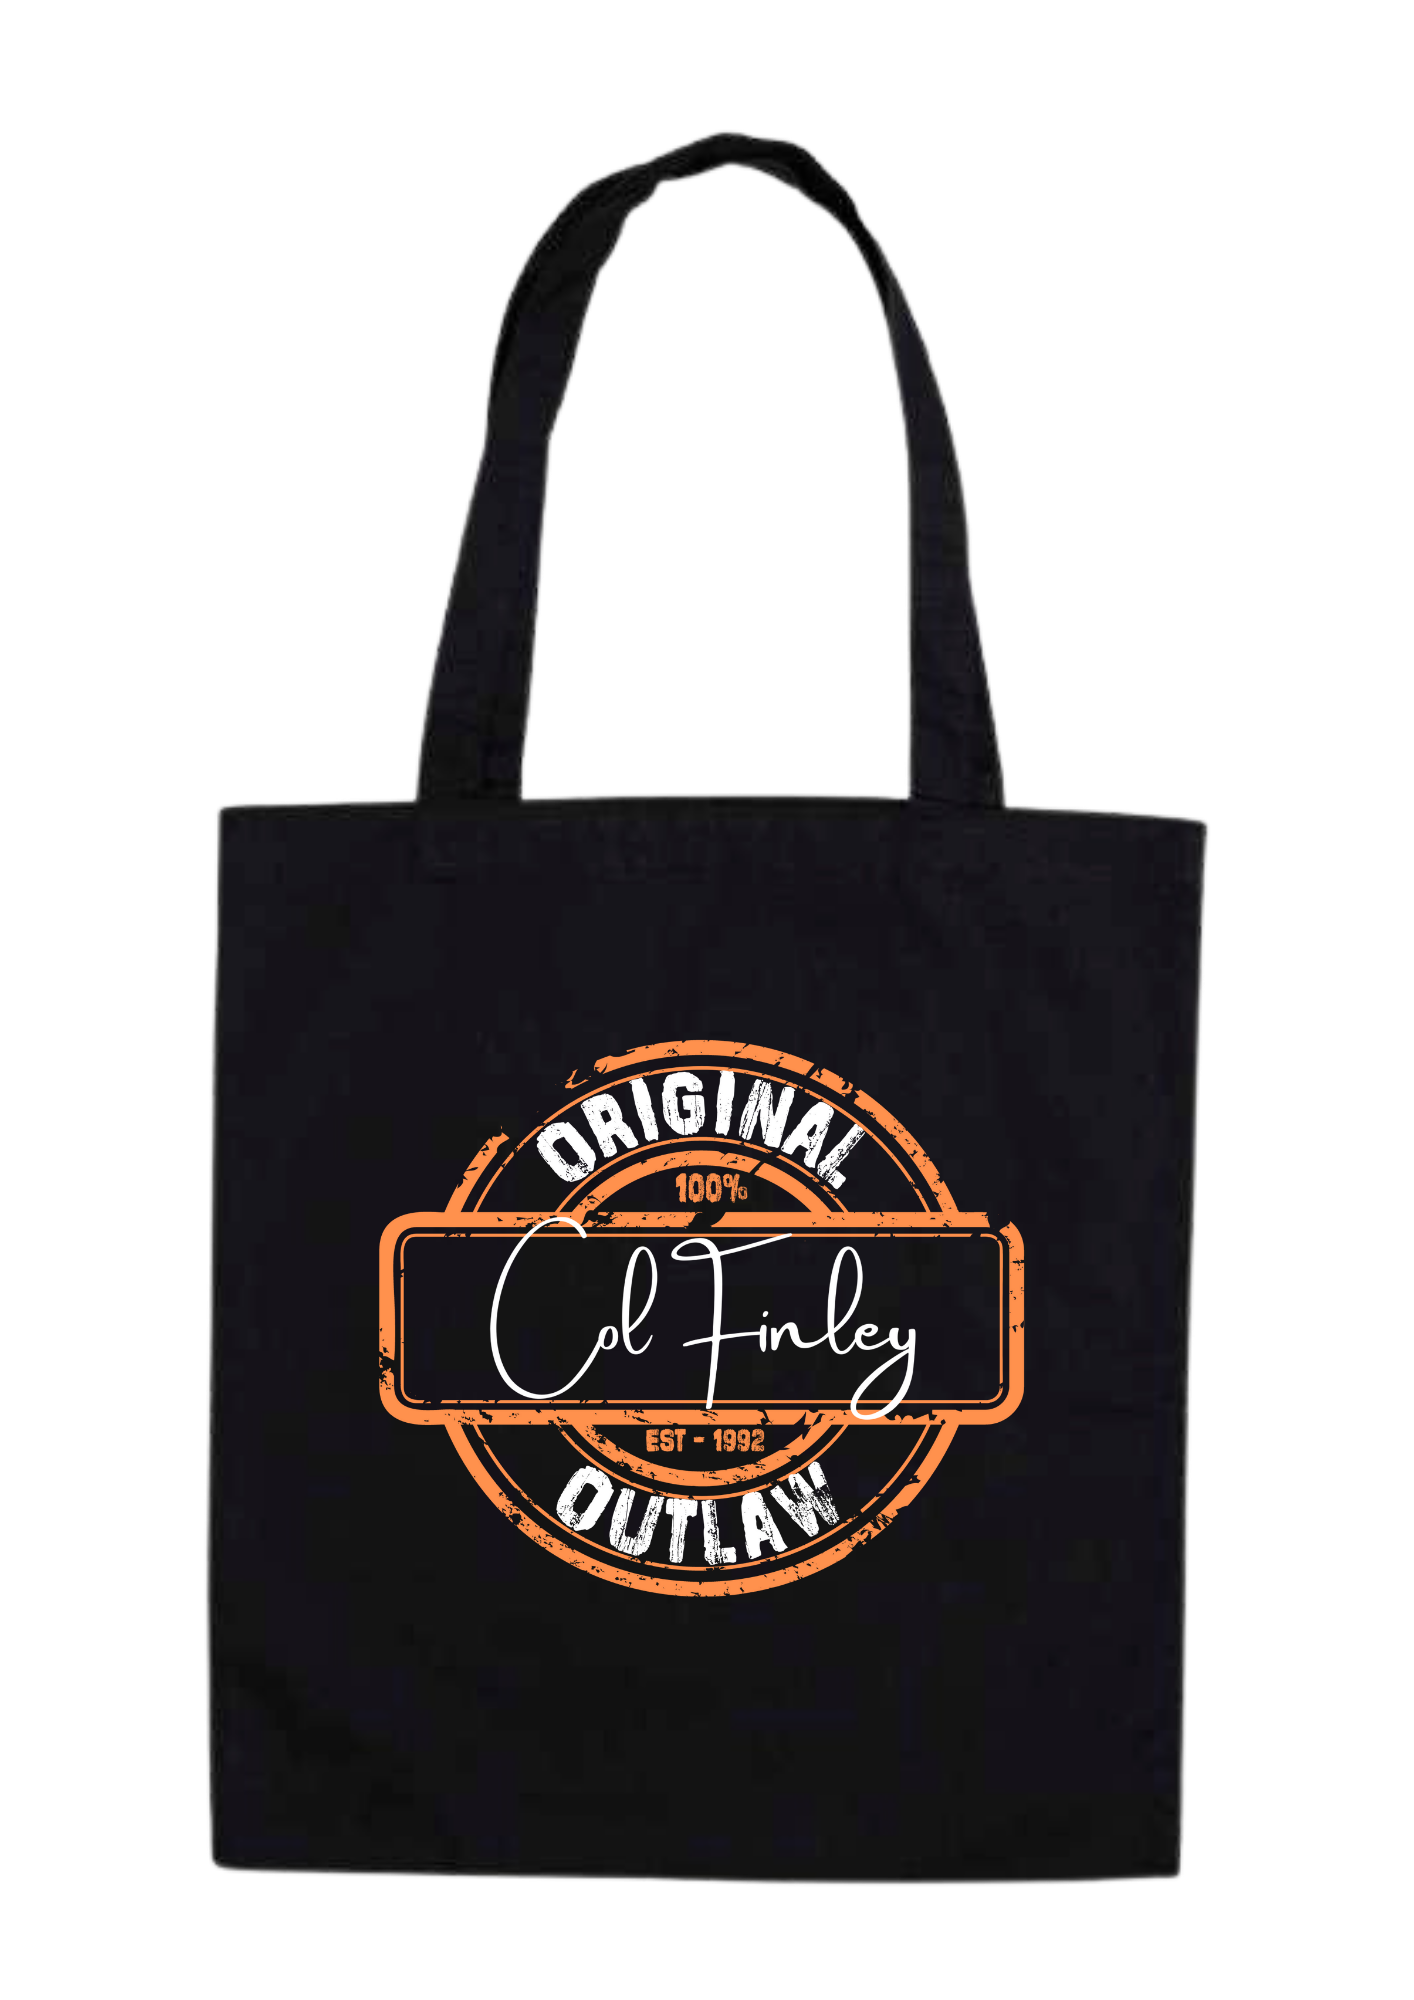 OCC-AM001 - Finley Tote Bag (Original Outlaw) Outlawed Clothing Company